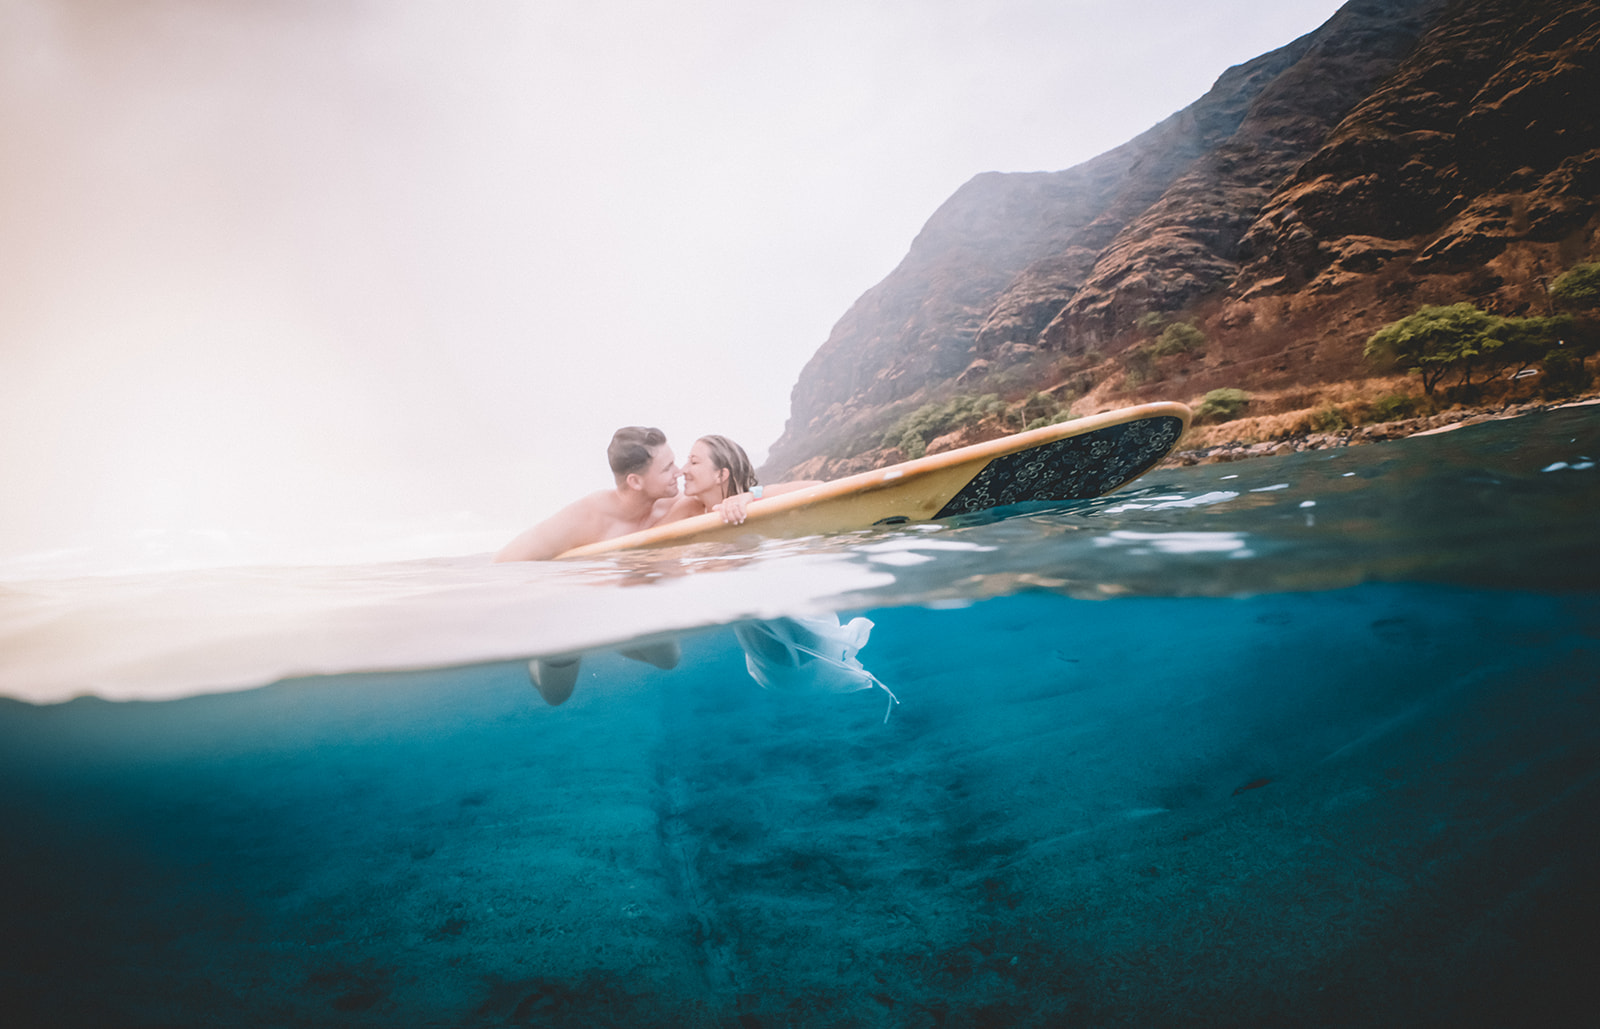 Underwater Couples Engagement Surfboard photos at Makua Beach on Oahu, Hawaii